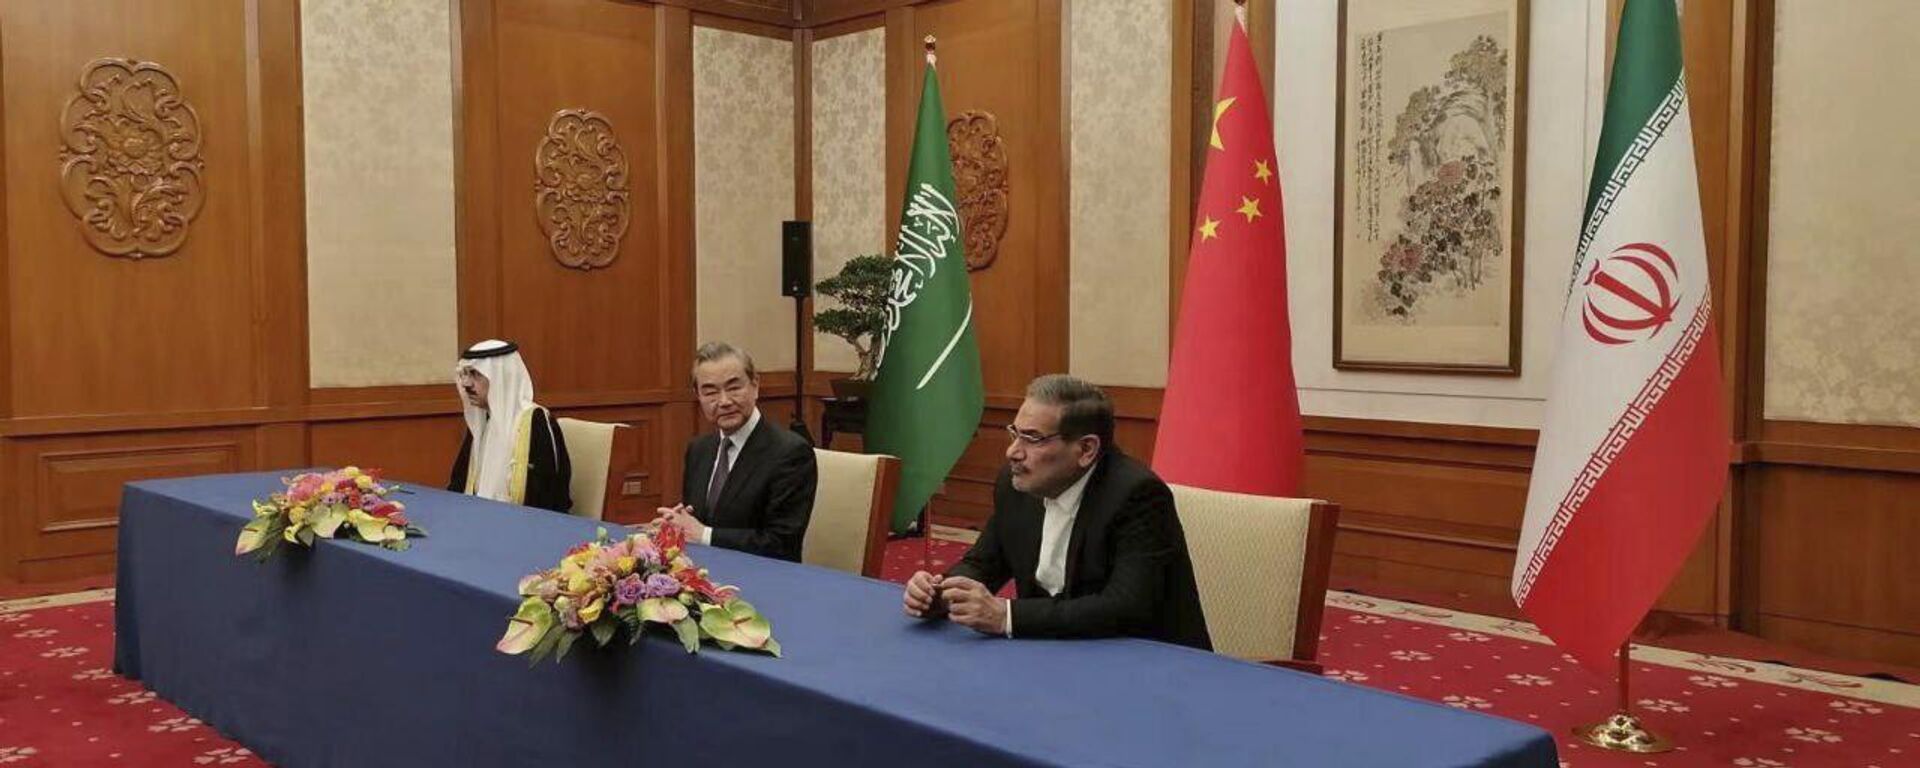 In this photo released by Nournews, Secretary of Iran's Supreme National Security Council, Ali Shamkhani, right, China's most senior diplomat Wang Yi, center, and Saudi Arabia's National Security Adviser Musaad bin Mohammed al-Aiban looks on during an agreement signing ceremony between Iran and Saudi Arabia to reestablish diplomatic relations and reopen embassies after seven years of tensions between the Mideast rivals, in Beijing, China, Friday, March 10, 2023. - Sputnik International, 1920, 10.03.2023